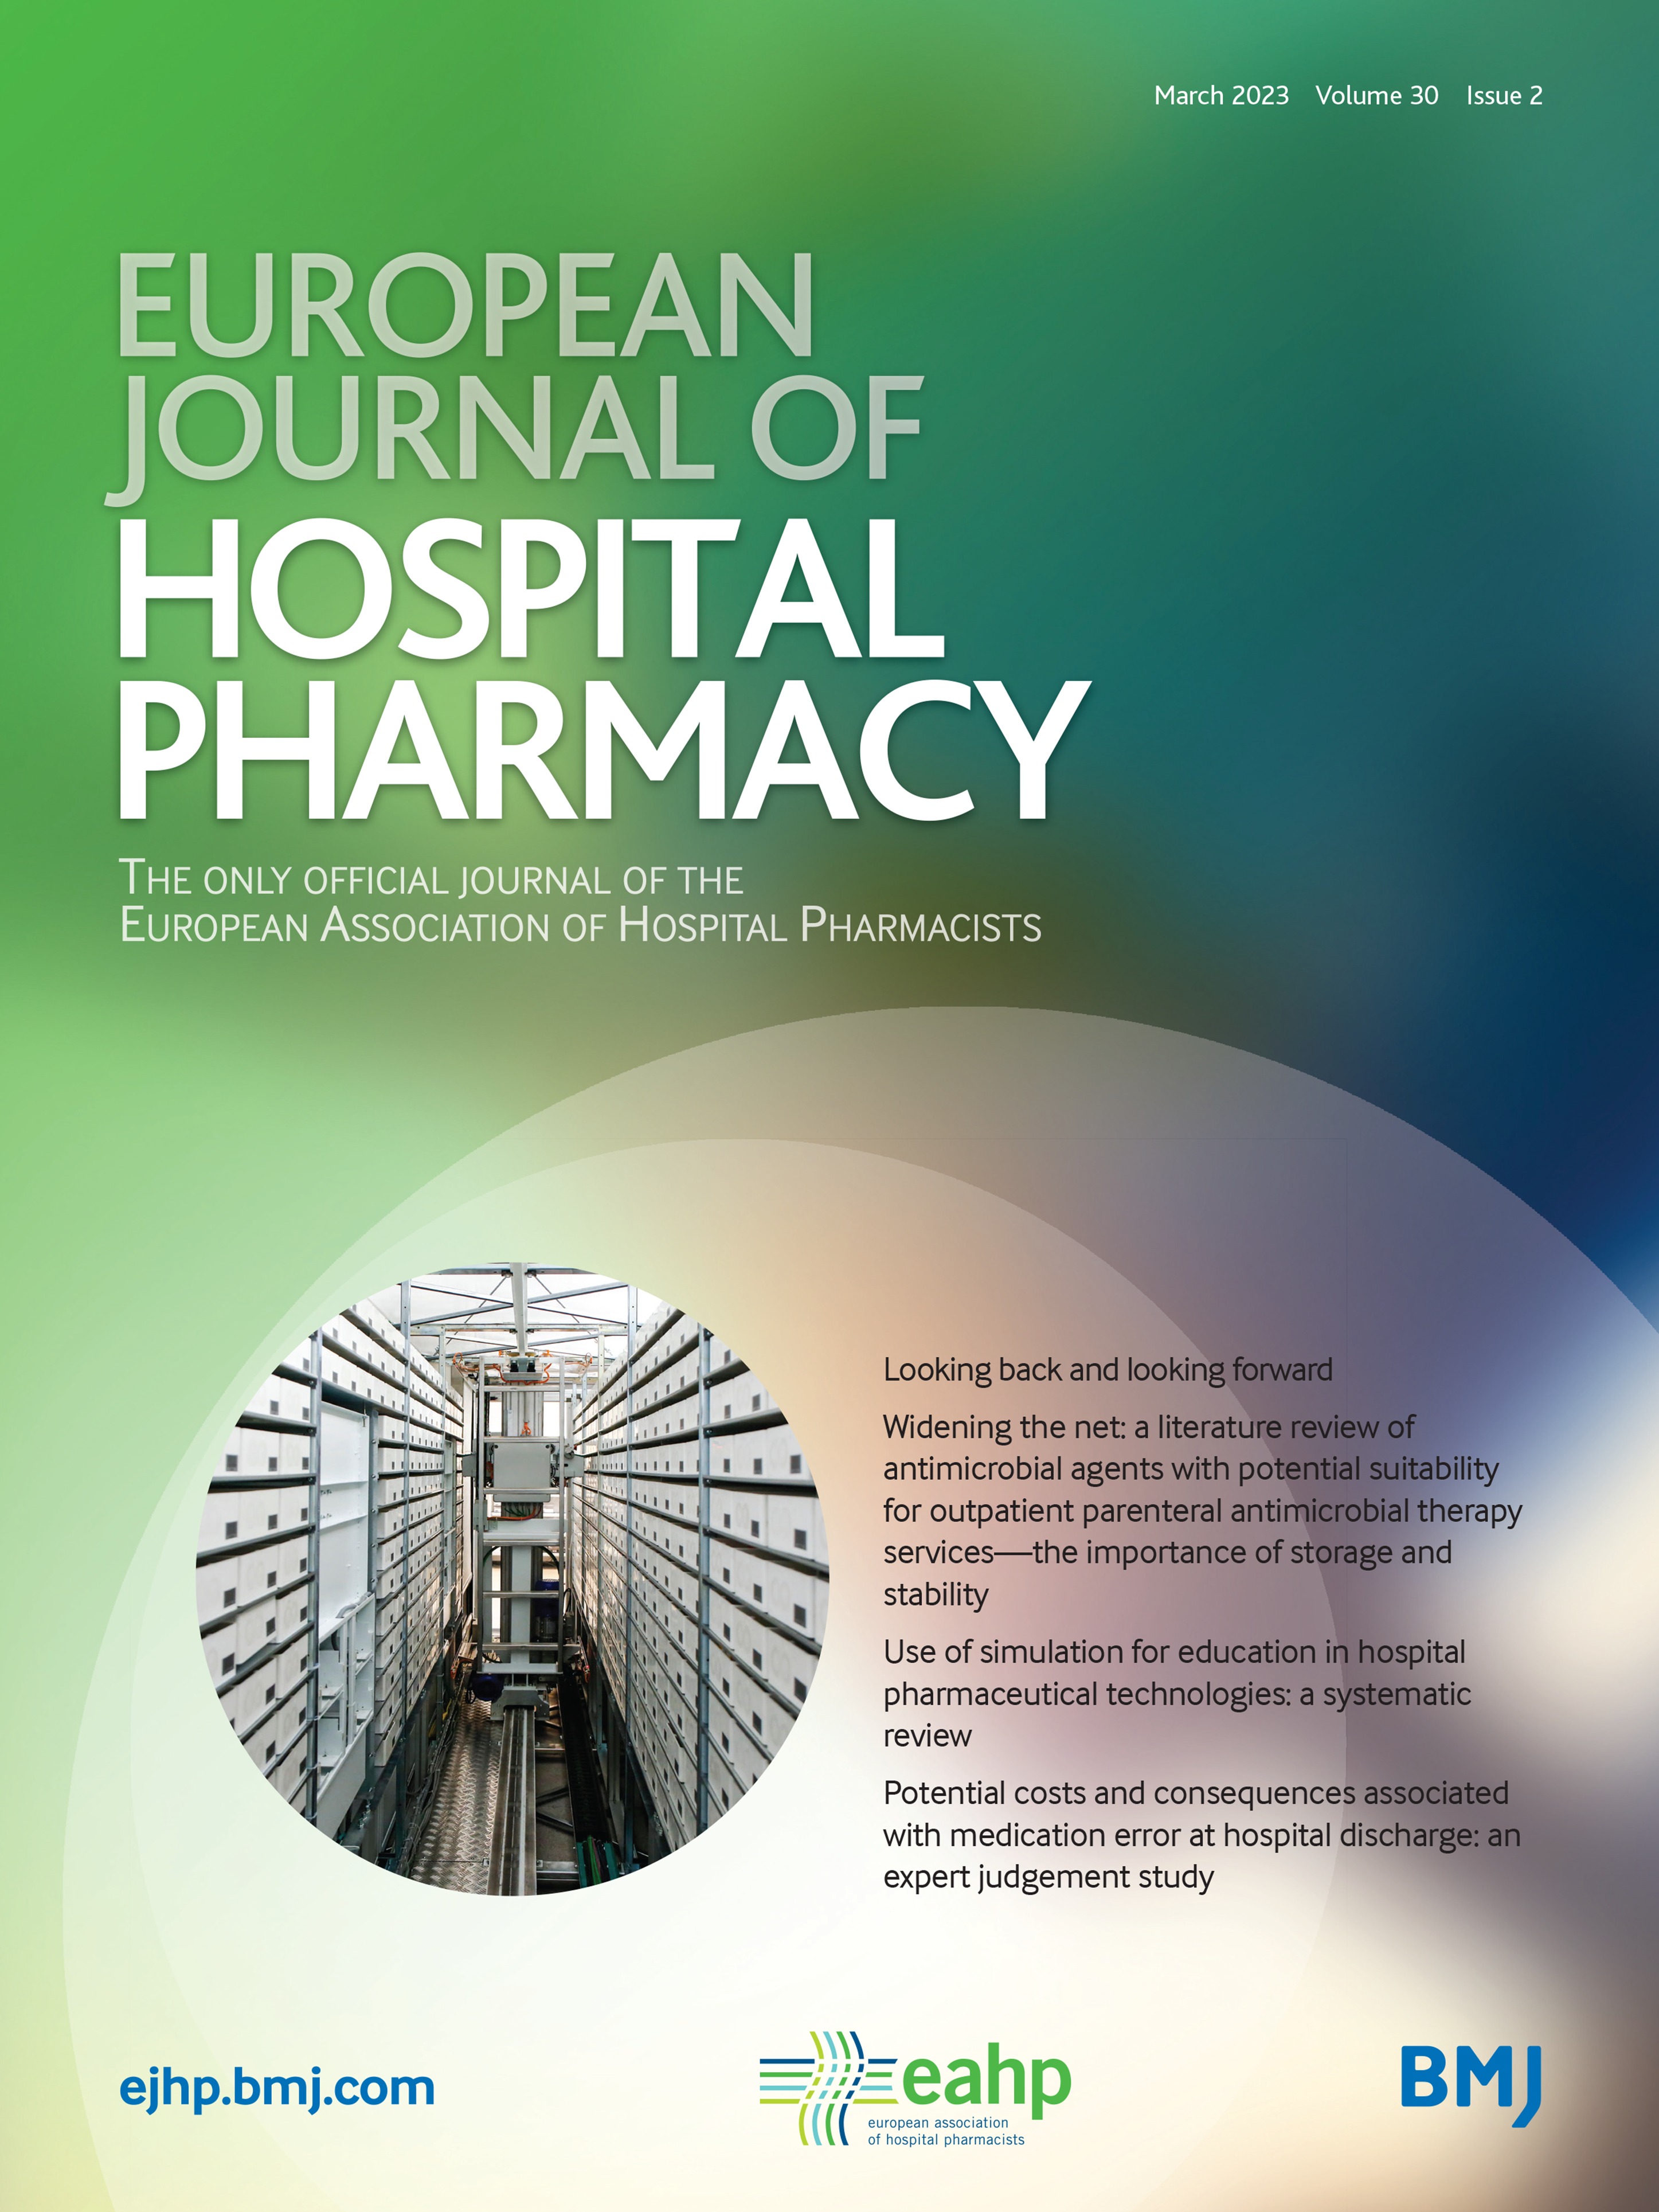 Use of simulation for education in hospital pharmaceutical technologies: a systematic review